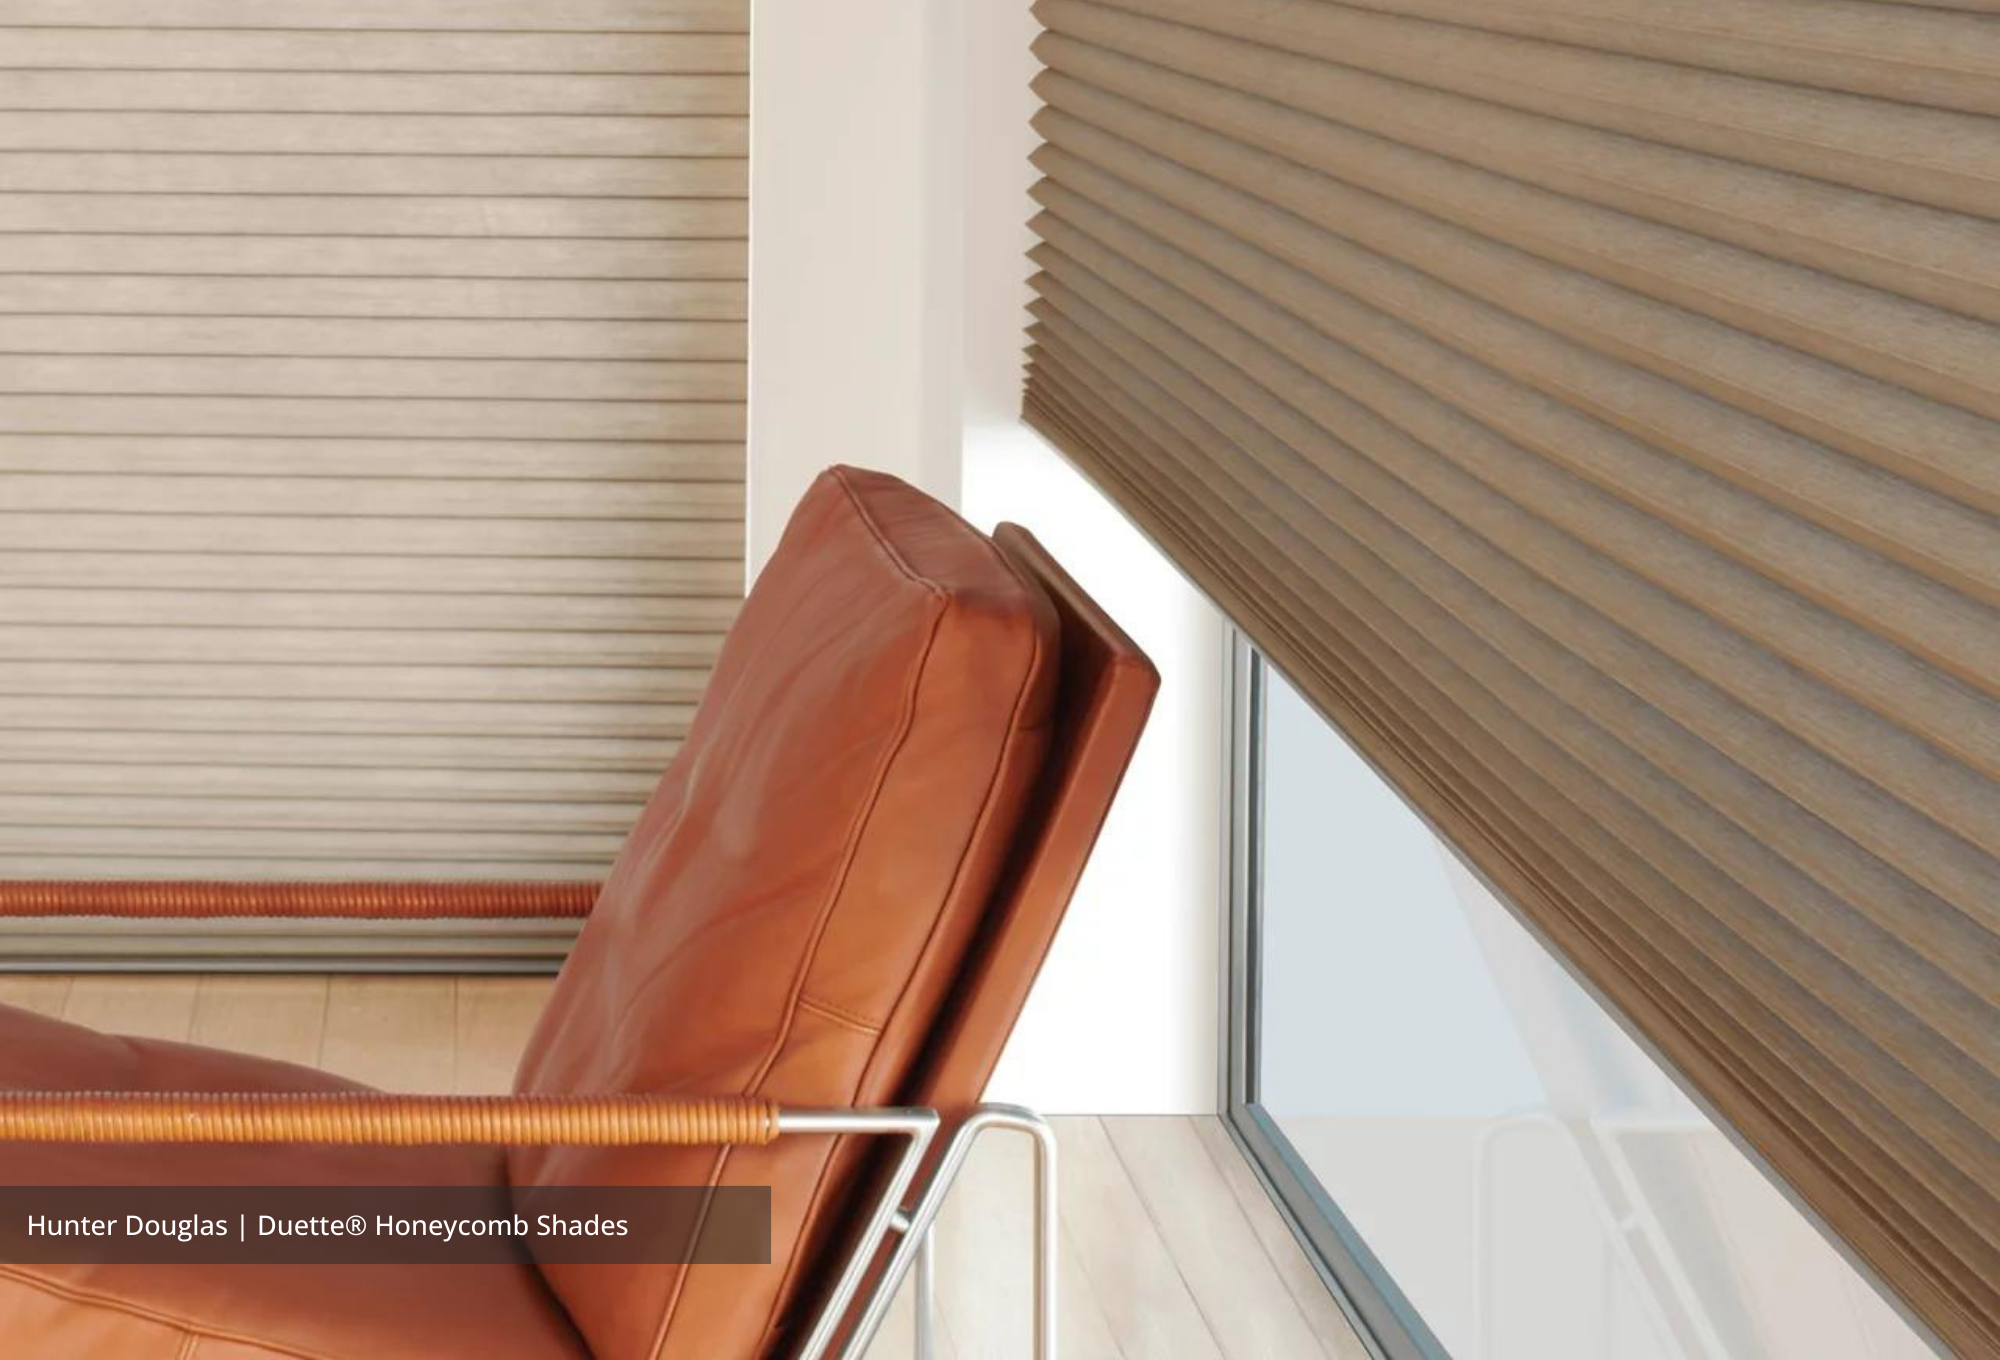 Hunter Douglas Duette Honeycomb Shades available at JC Licht.